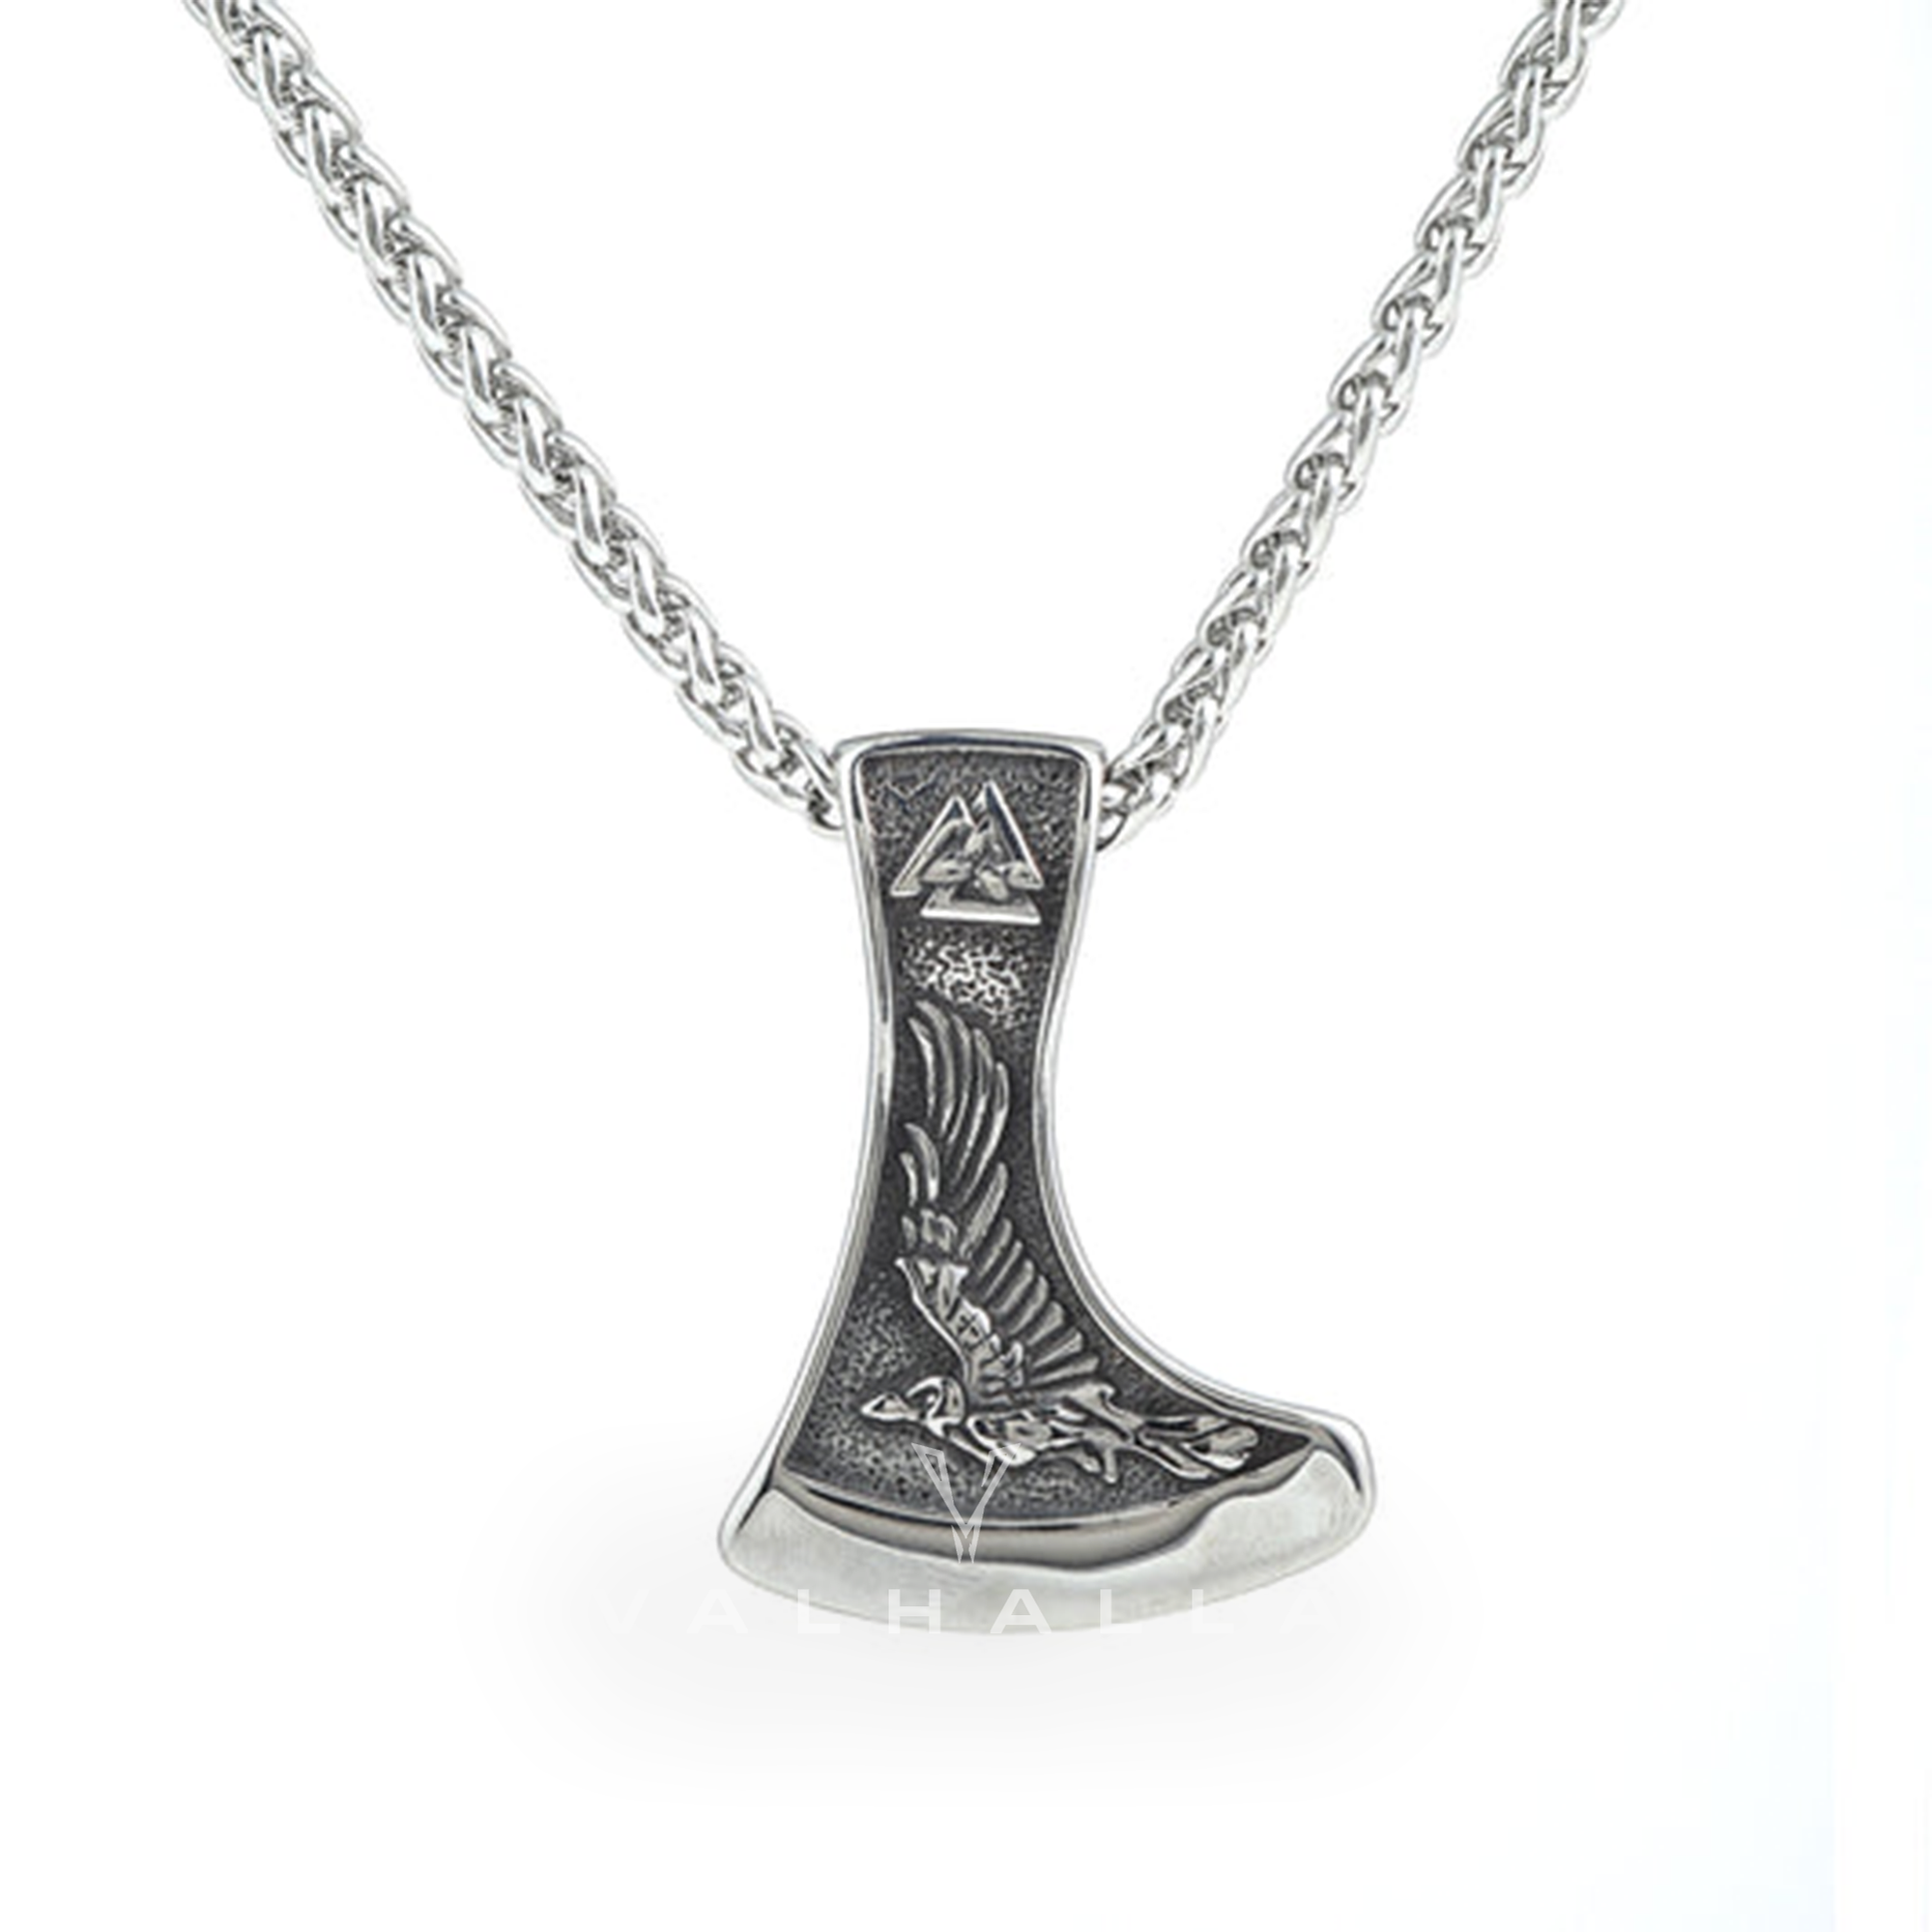 Handcrafted Stainless Steel Valknut with Raven & Wolf Necklace